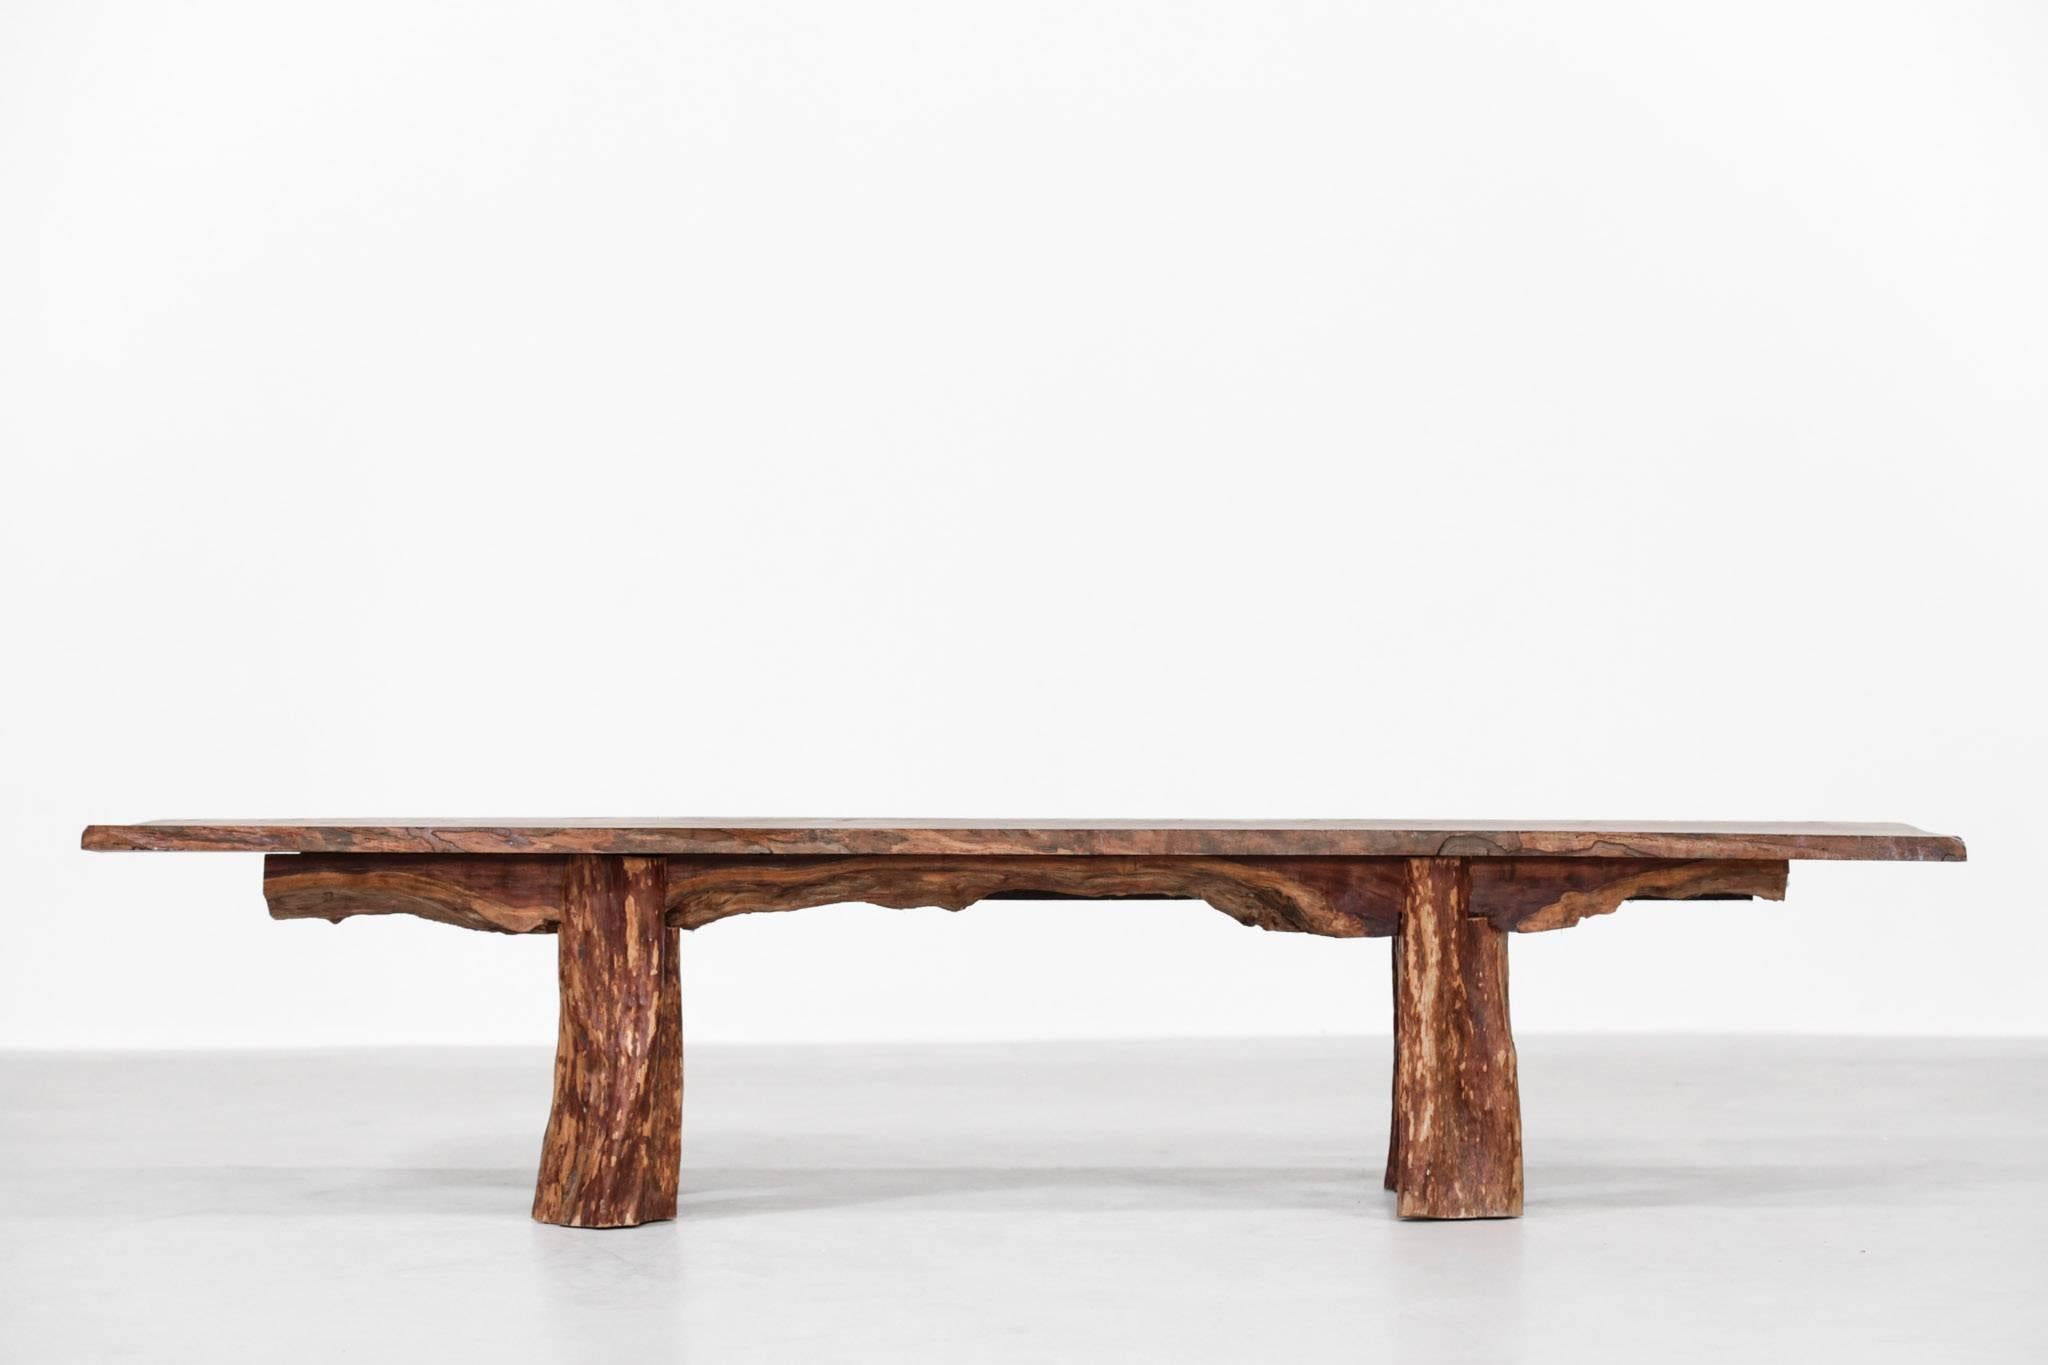 Very nice Brutalist bench or coffee table in wood.